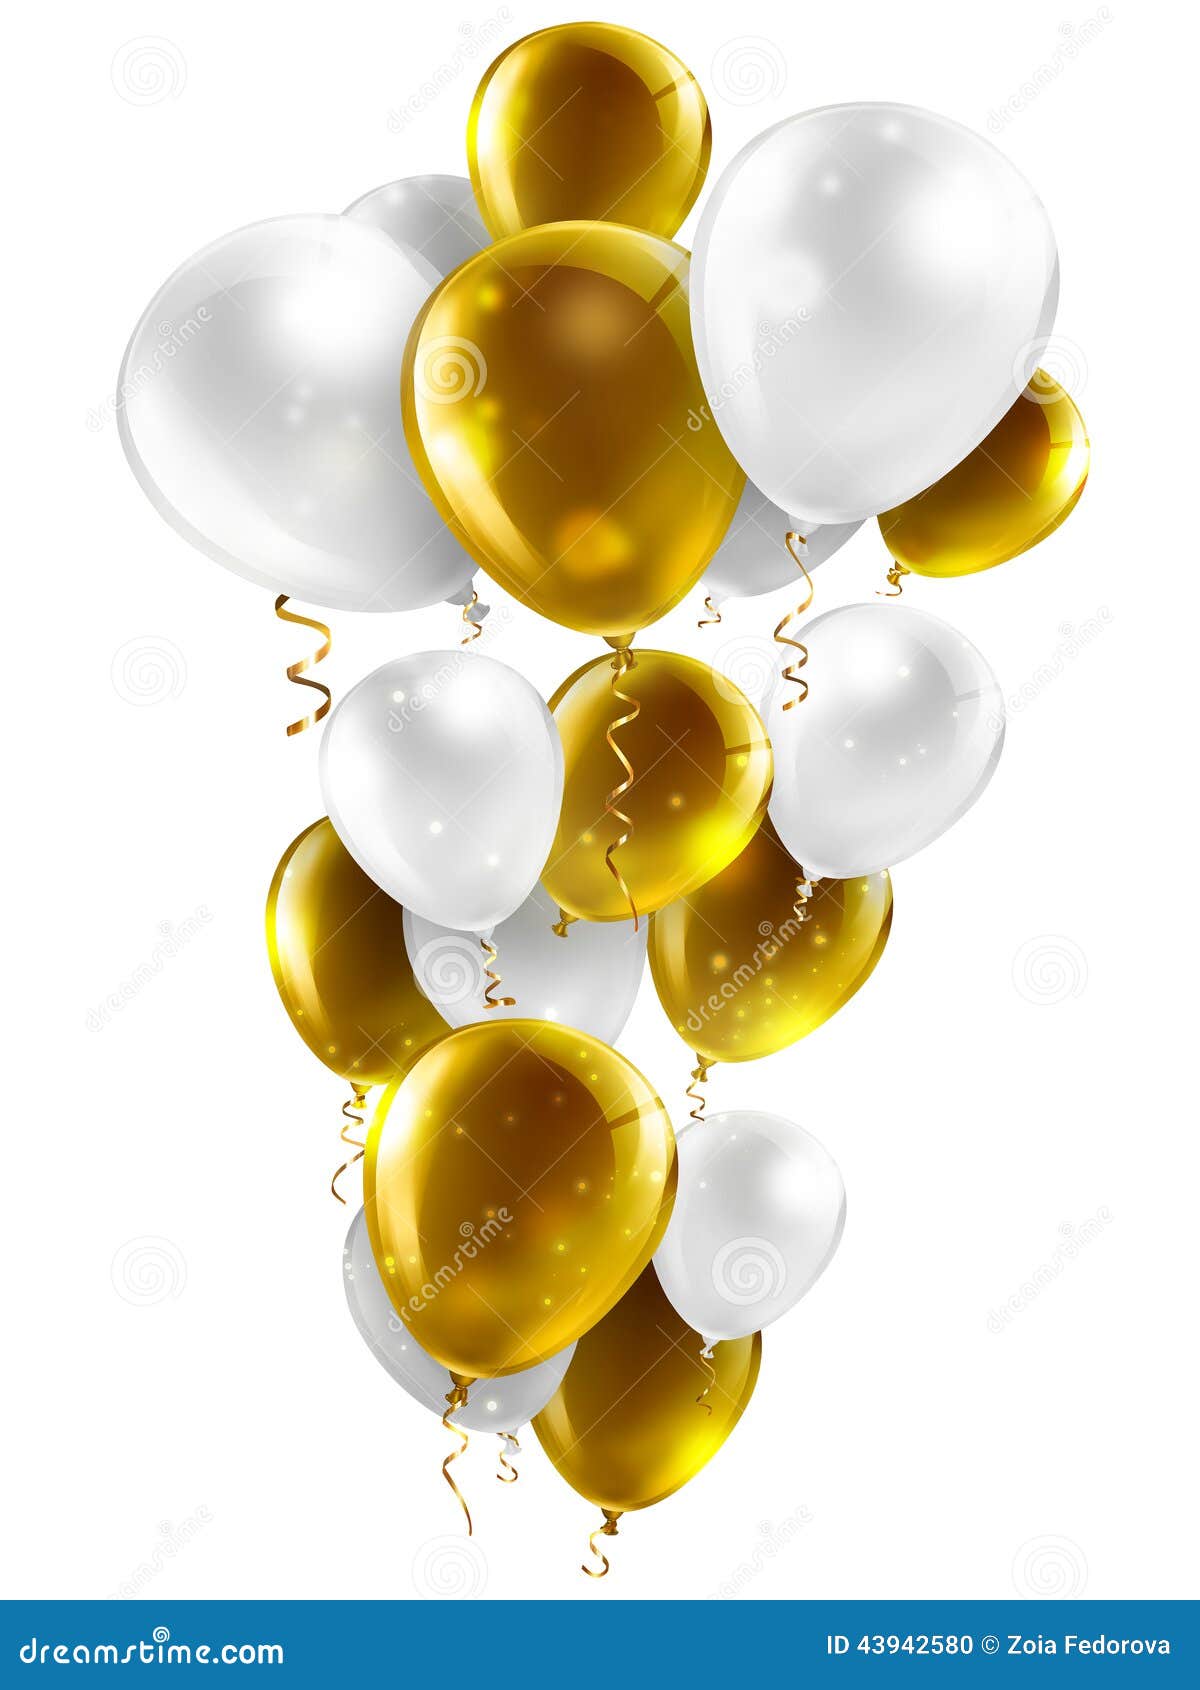 Gold and white balloons on a white background.